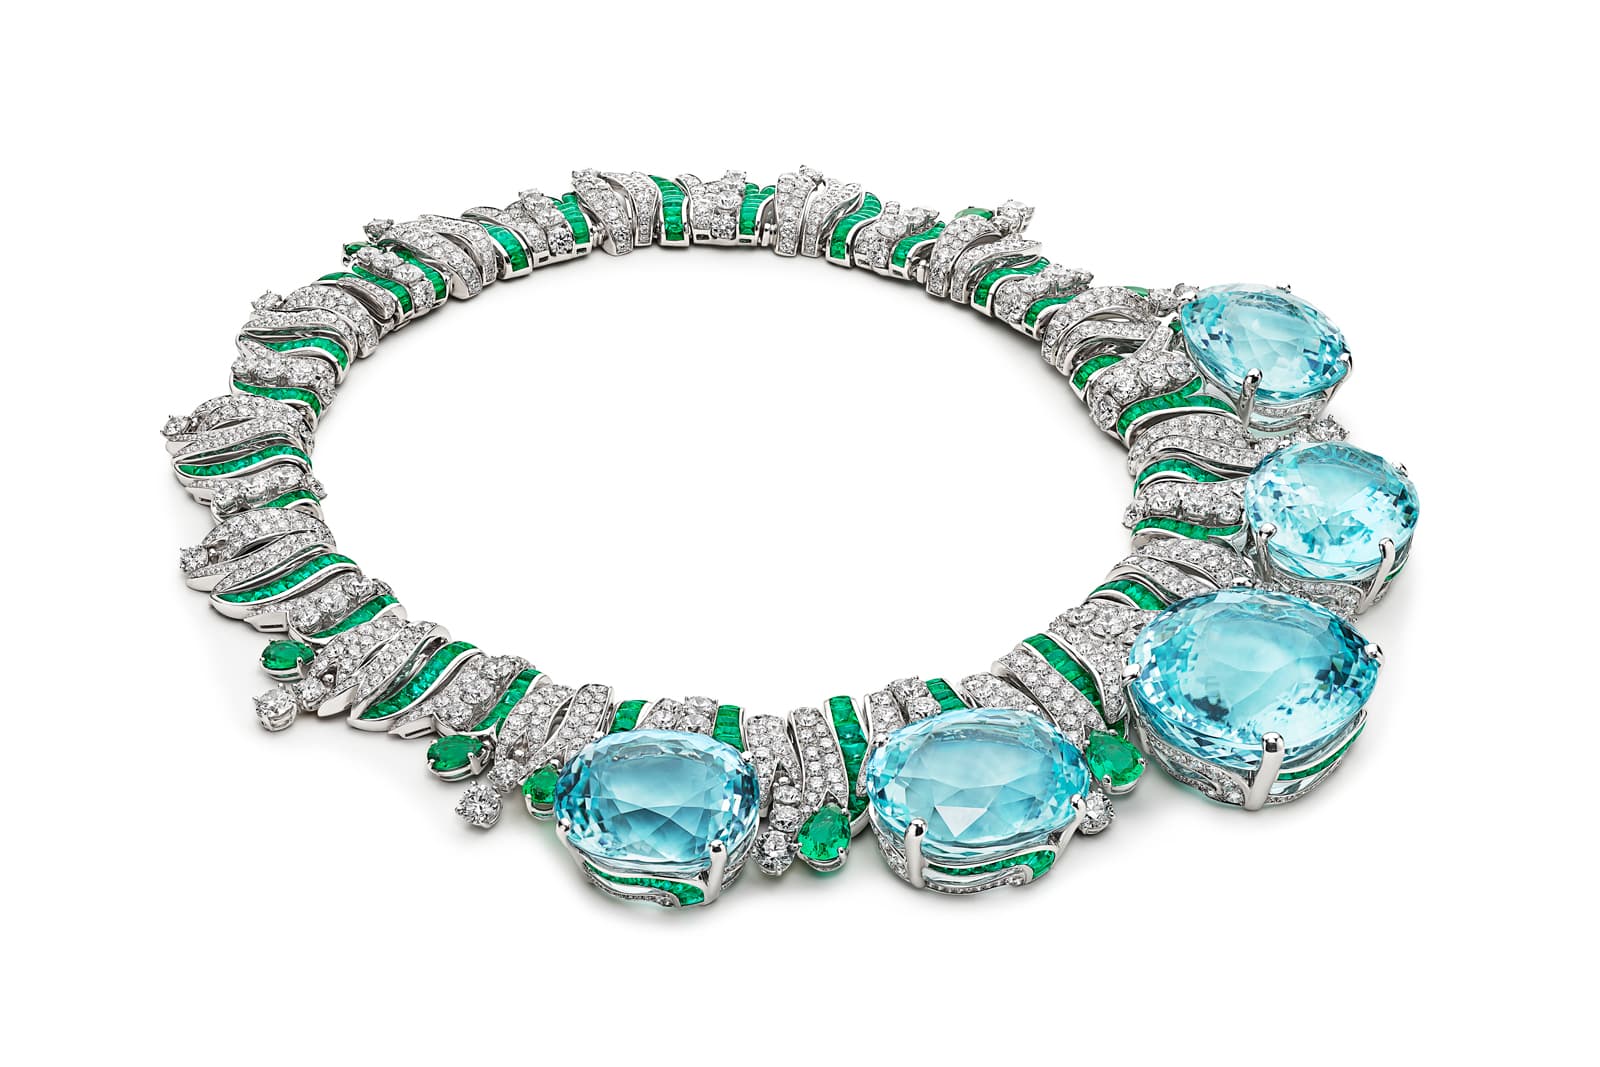 Bulgari Magnifica Mediterranean Queen High Jewellery necklace with five cushion-cut Paraiba tourmalines of 473.82 carats, buff-top emeralds and diamonds